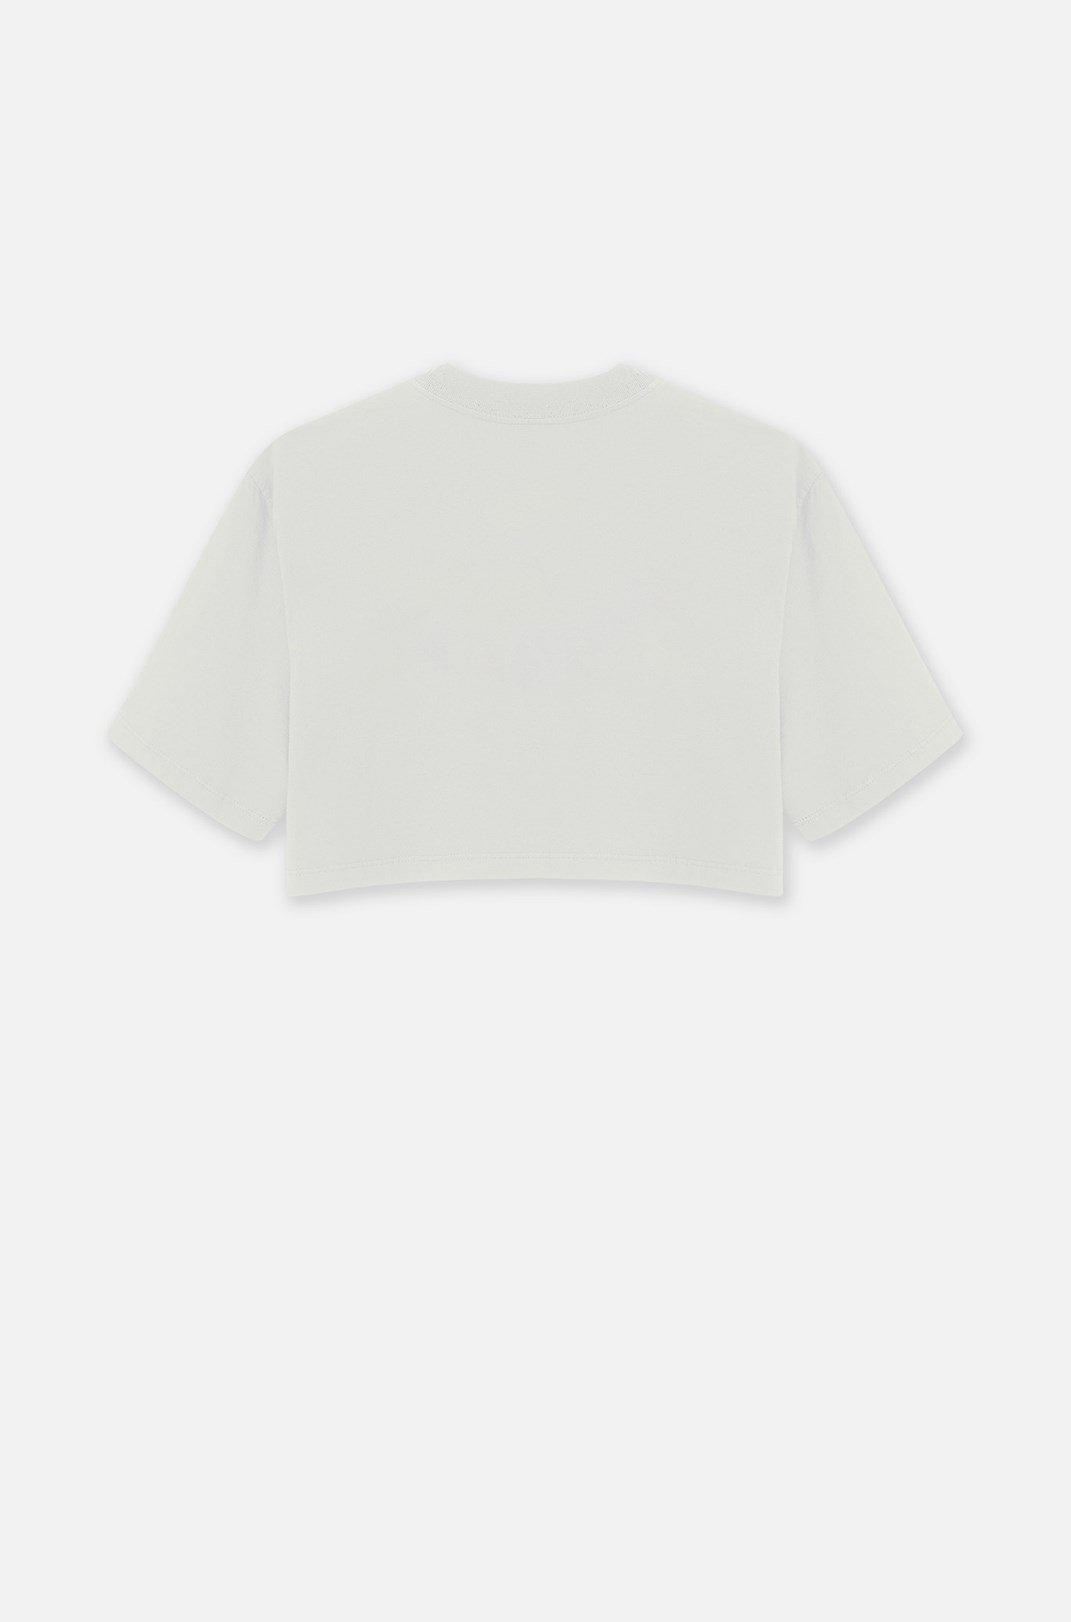 Cropped Bold Approve Yrslf Inverse Off White